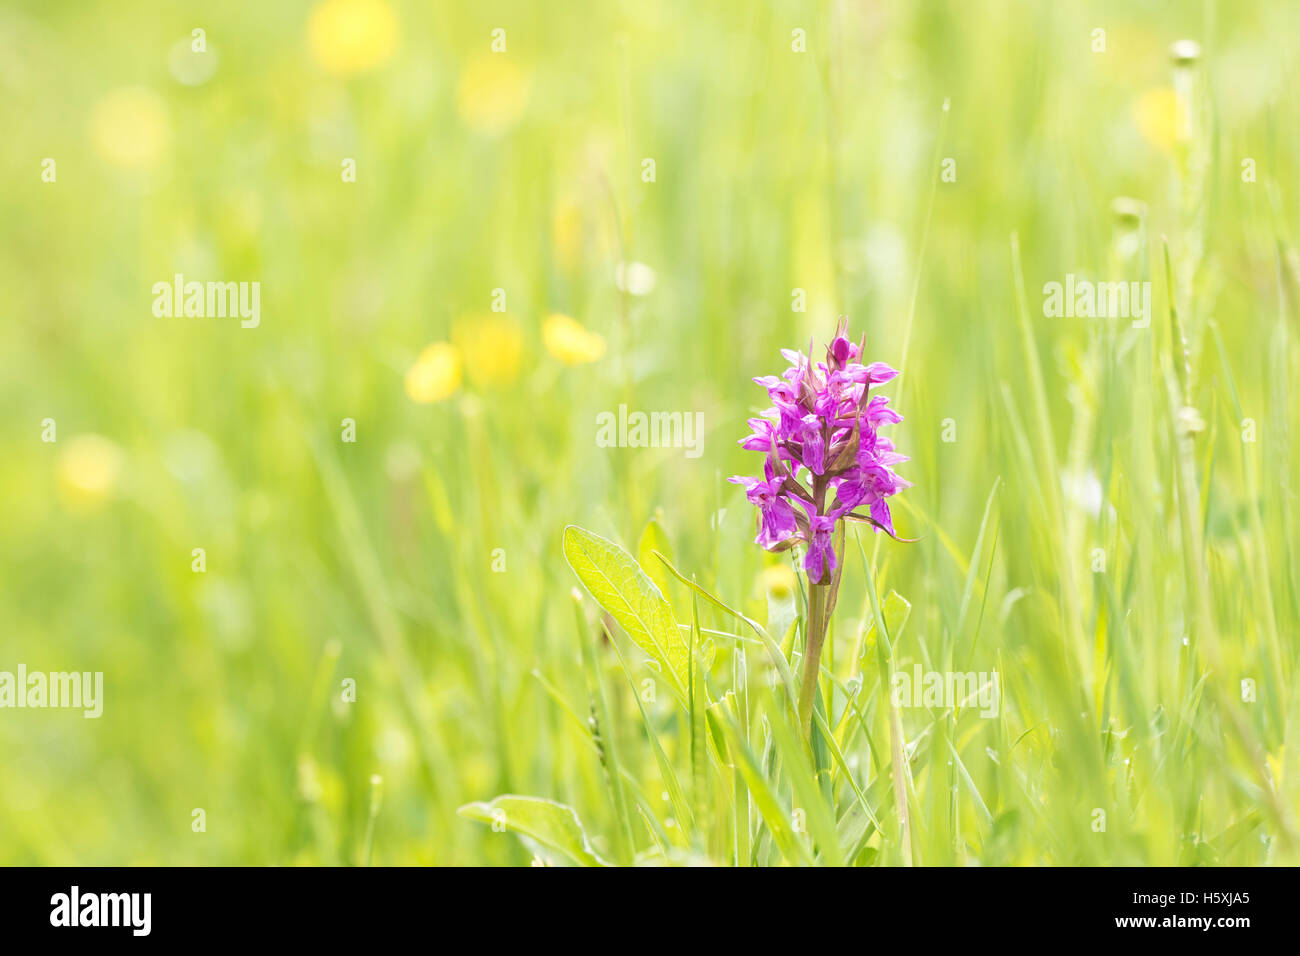 Close-up of a purple common spotted orchid flower (Dactylorhiza fuchsii) blooming in a meadow in a forest during spring season. Stock Photo